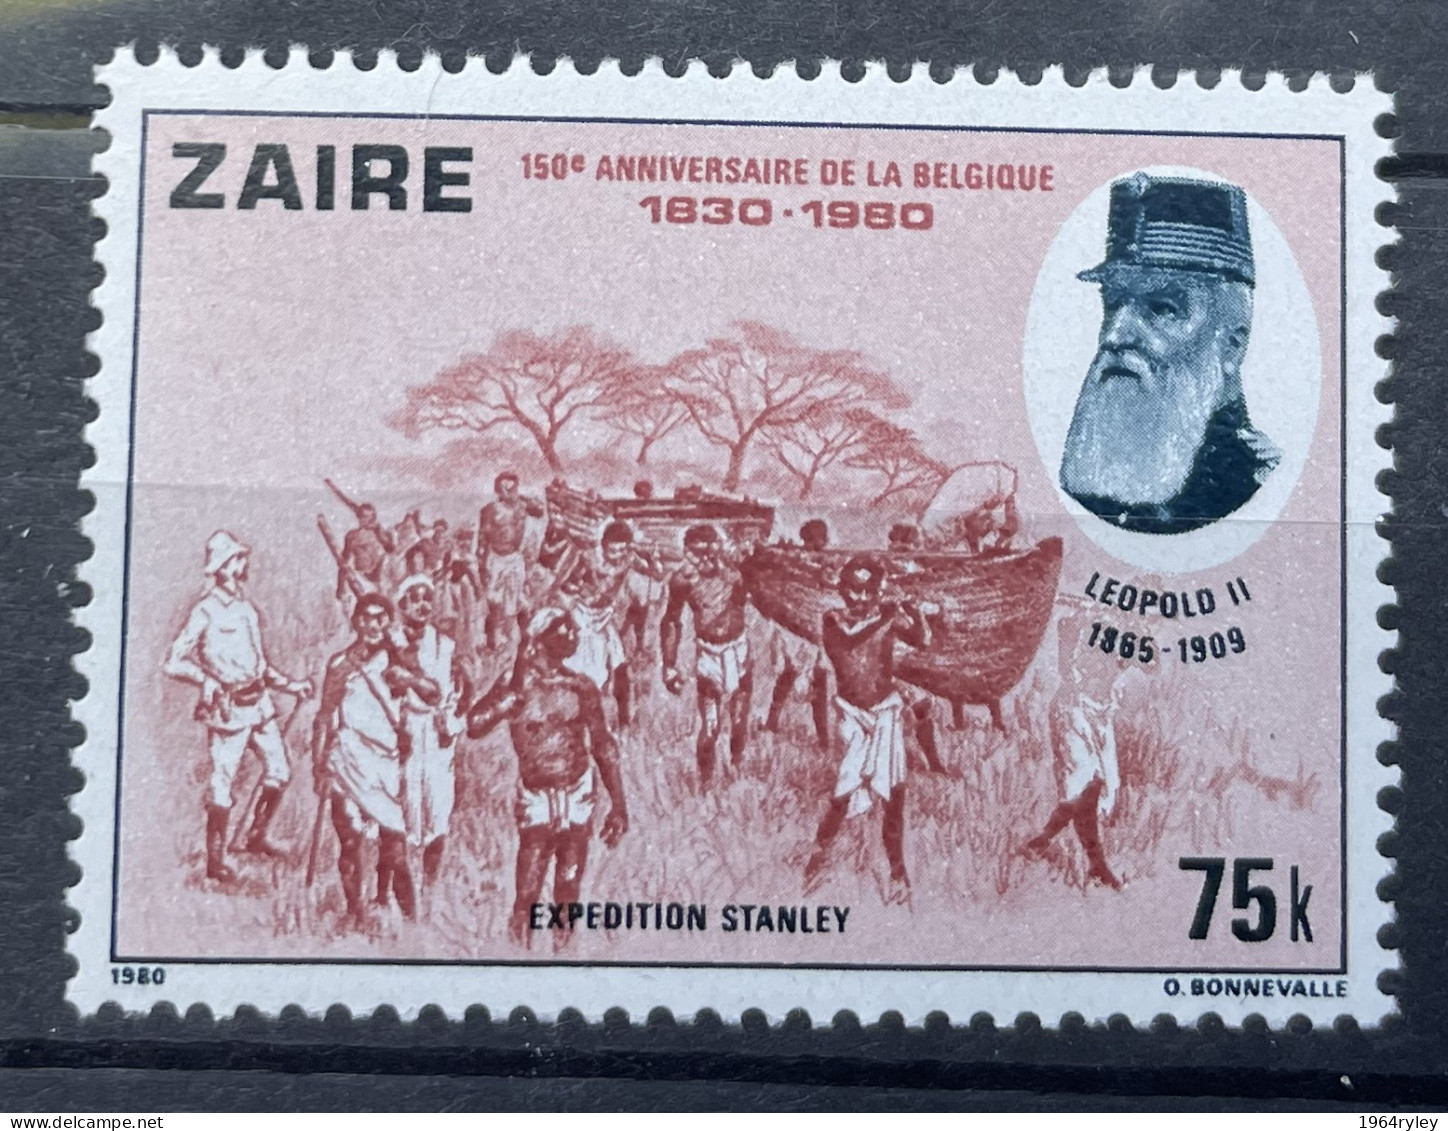 ZAIRE  - MNH** - 1980 - # 957 - Unused Stamps